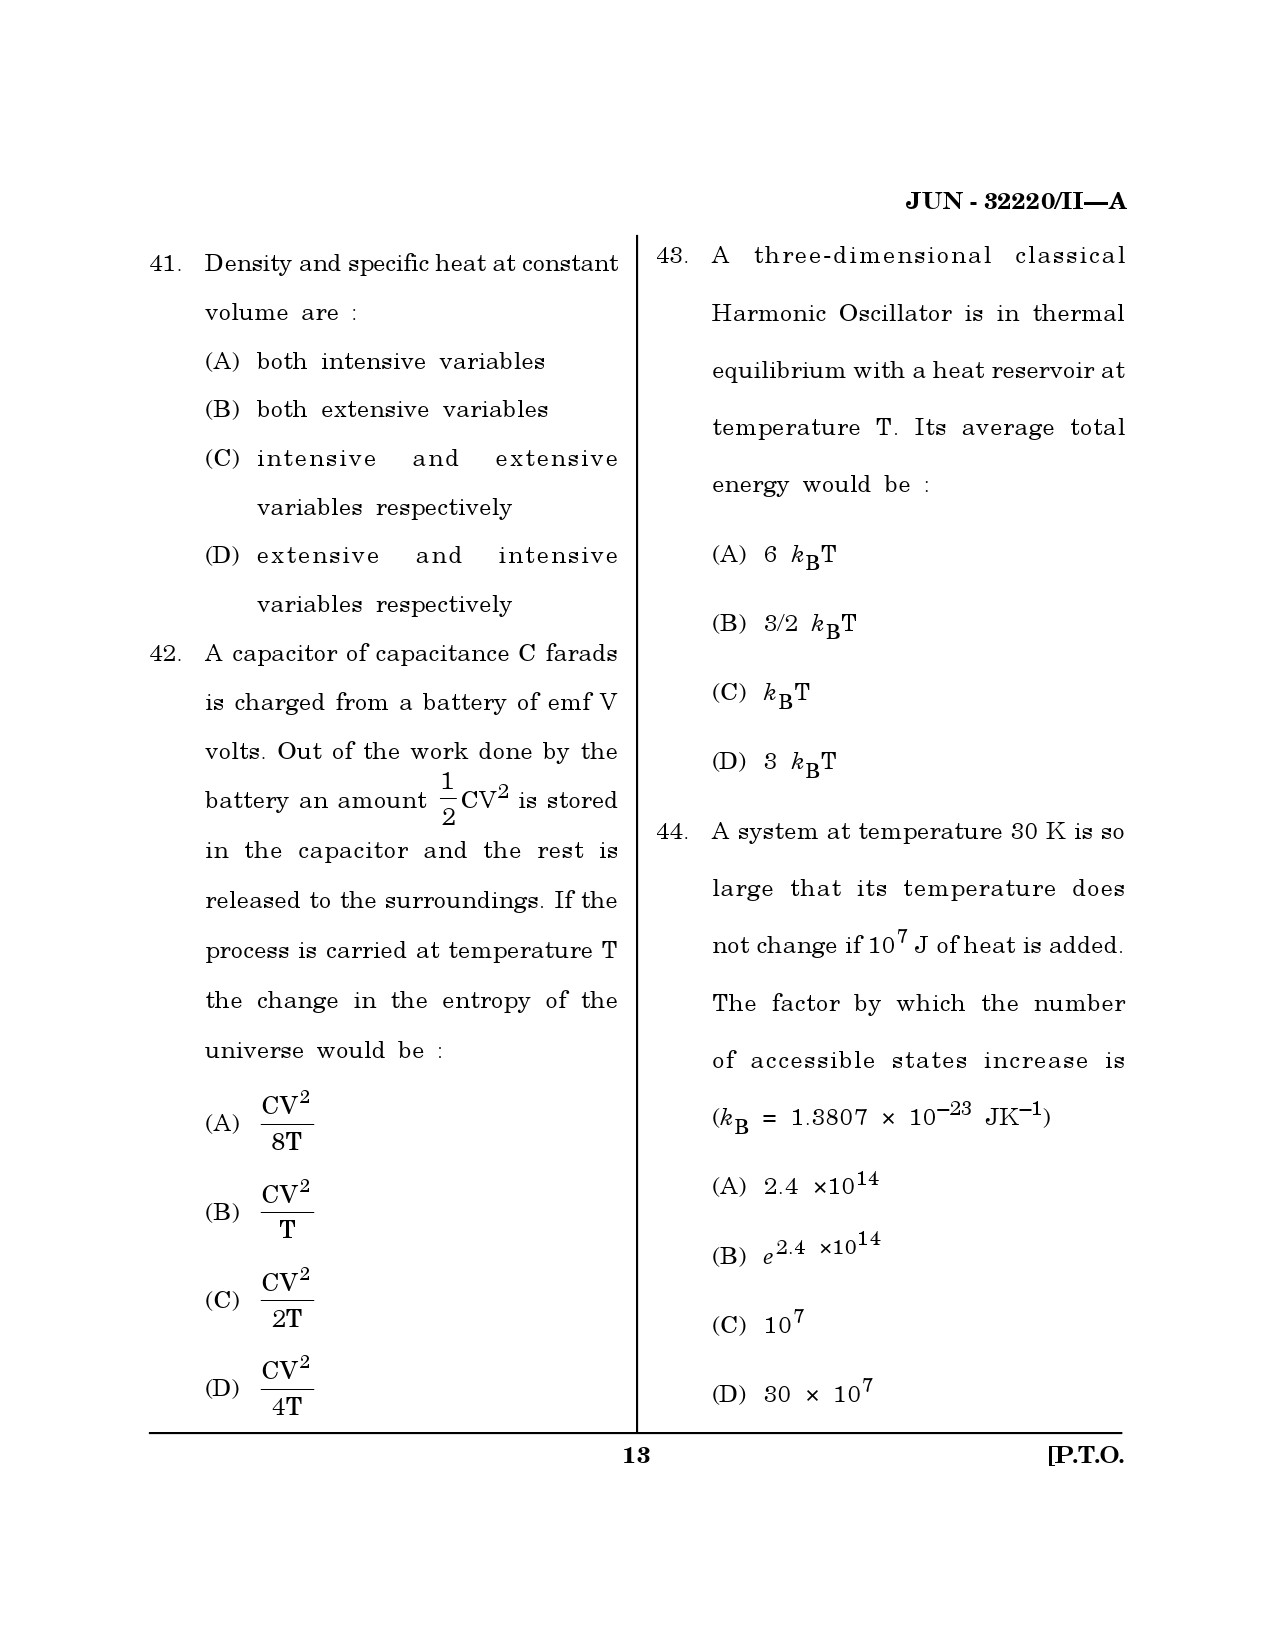 Maharashtra SET Physical Science Question Paper II June 2020 12